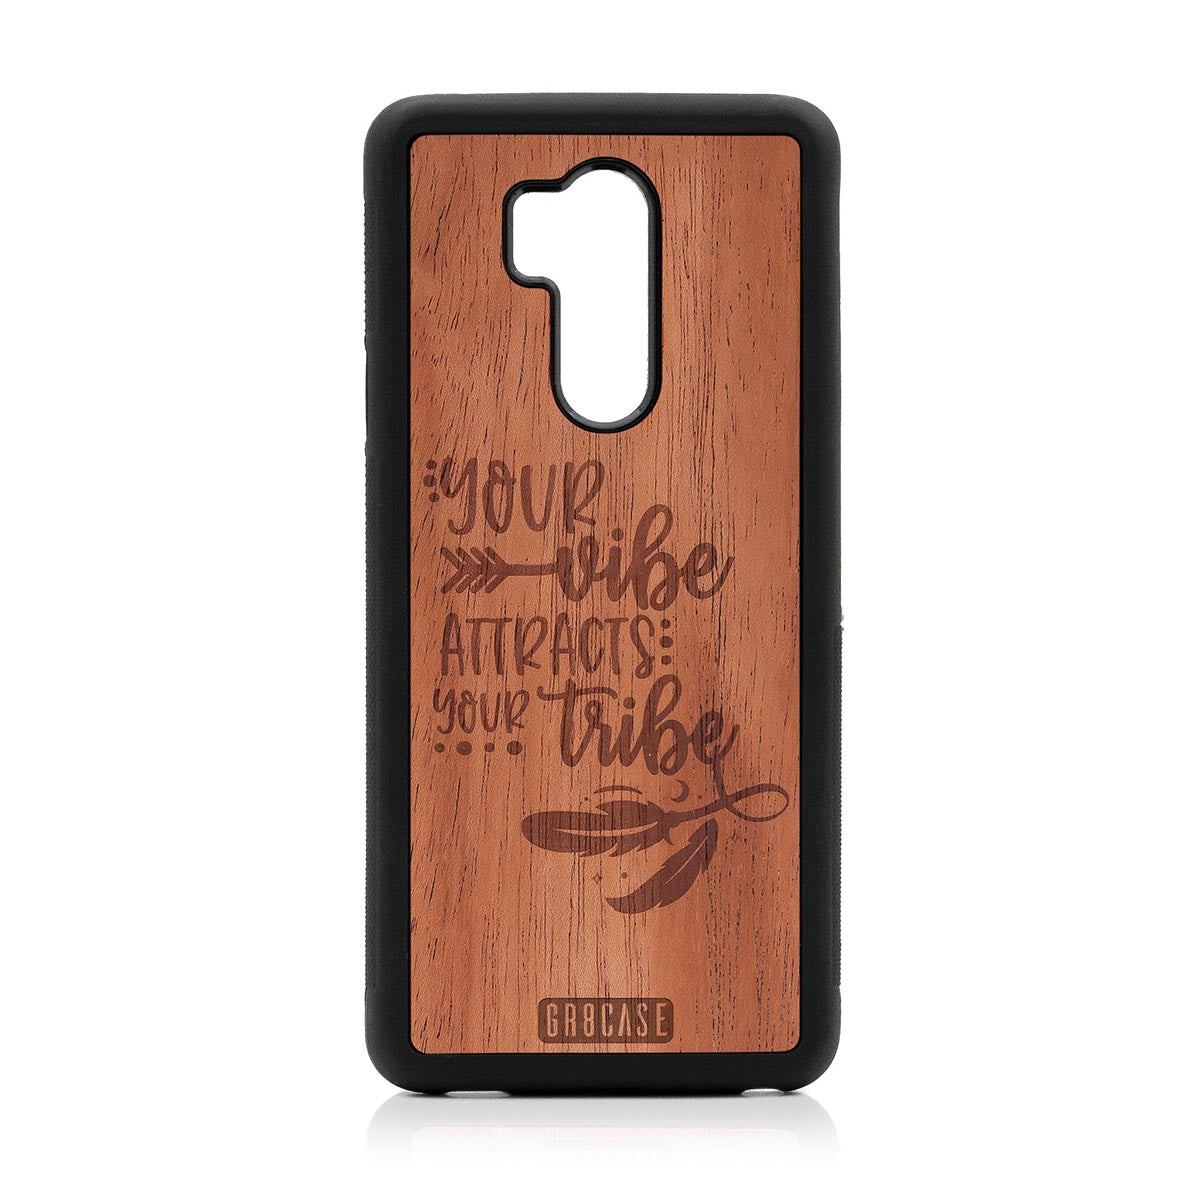 Your Vibe Attracts Your Tribe Design Wood Case LG G7 ThinQ